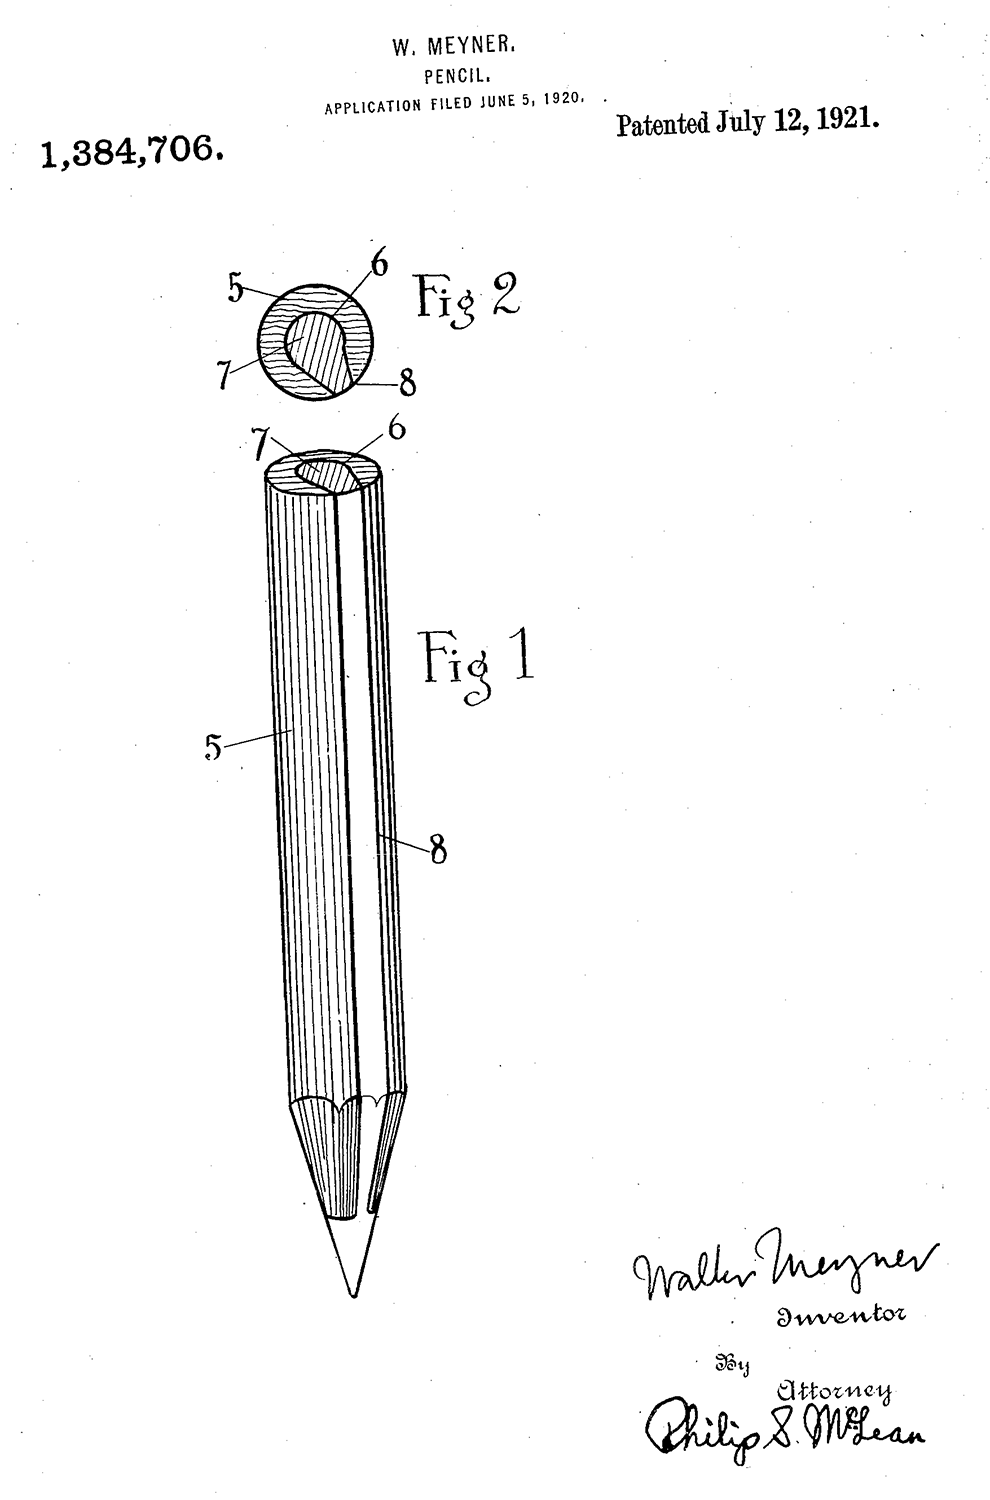 Meyner’s pencil patent from July 12, 1921